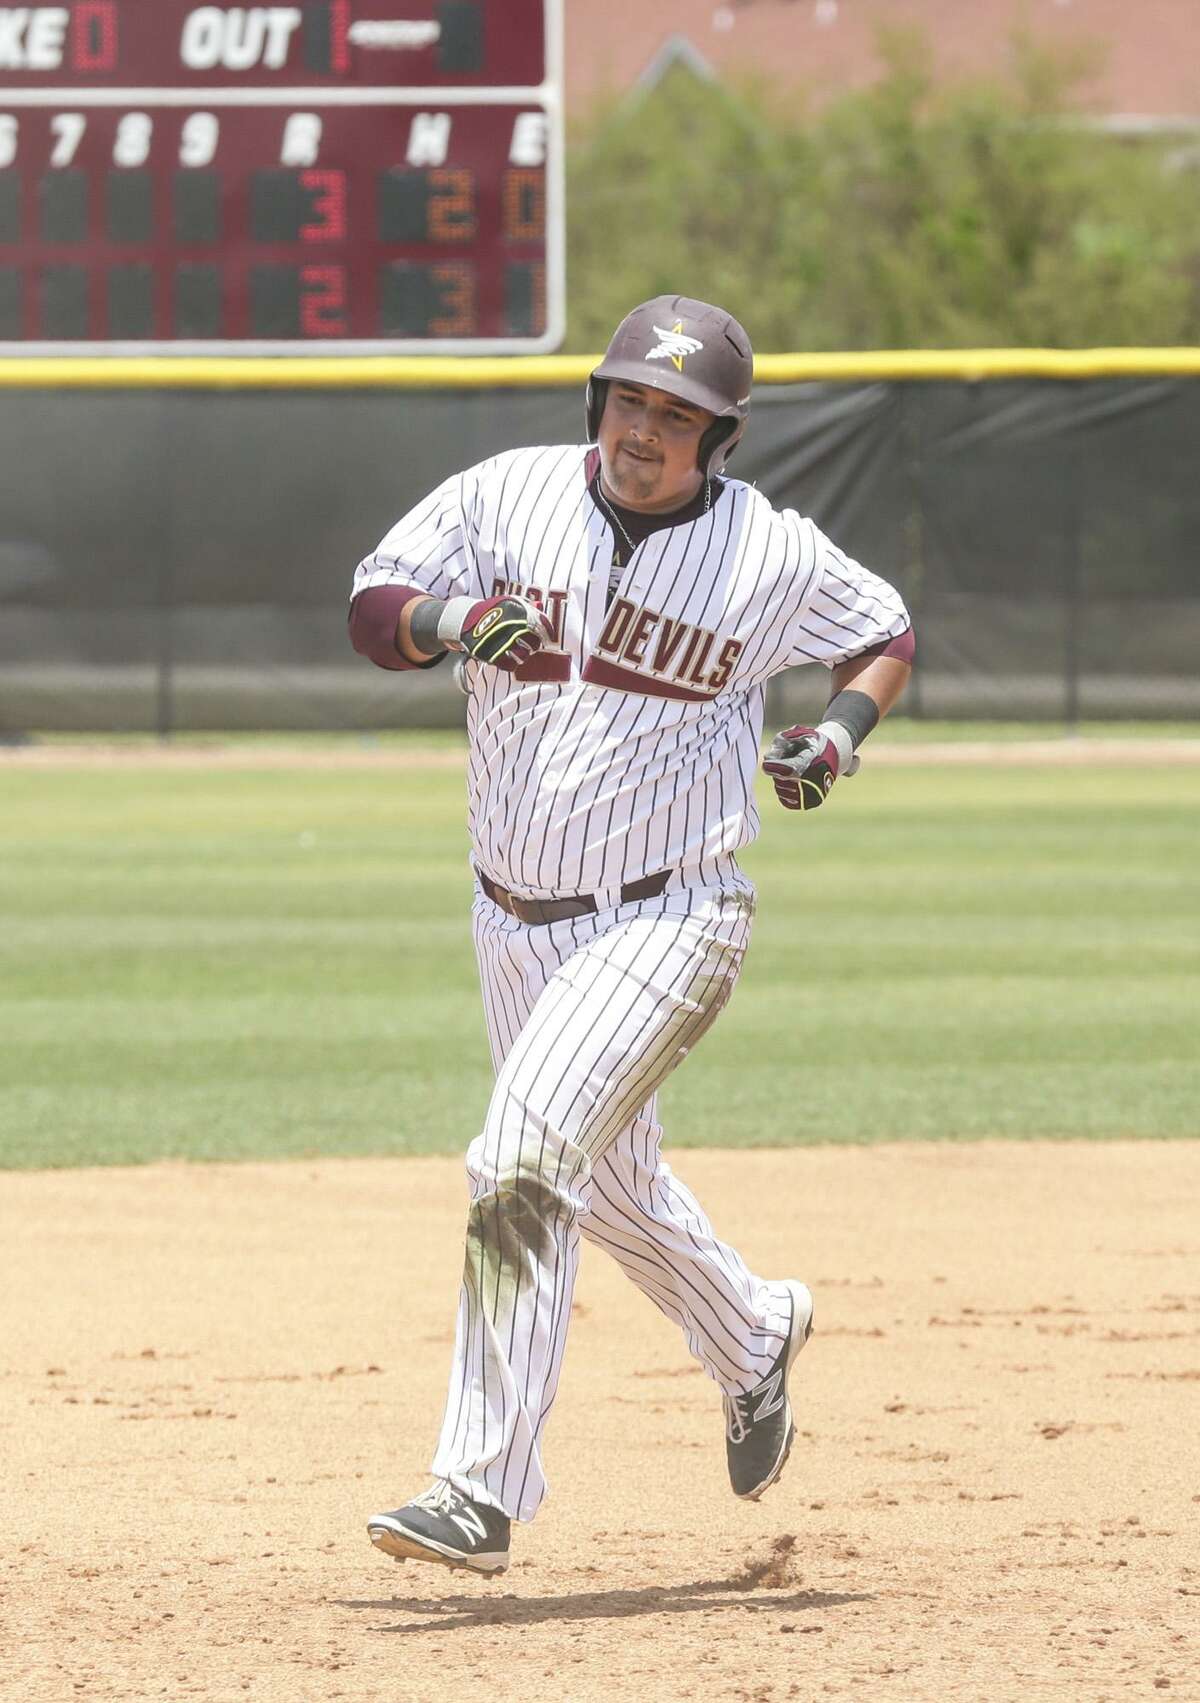 TAMIU’s Sergio Pollorena hit a ninth-inning home run in the Dustdevils’ 5-4 victory Friday.